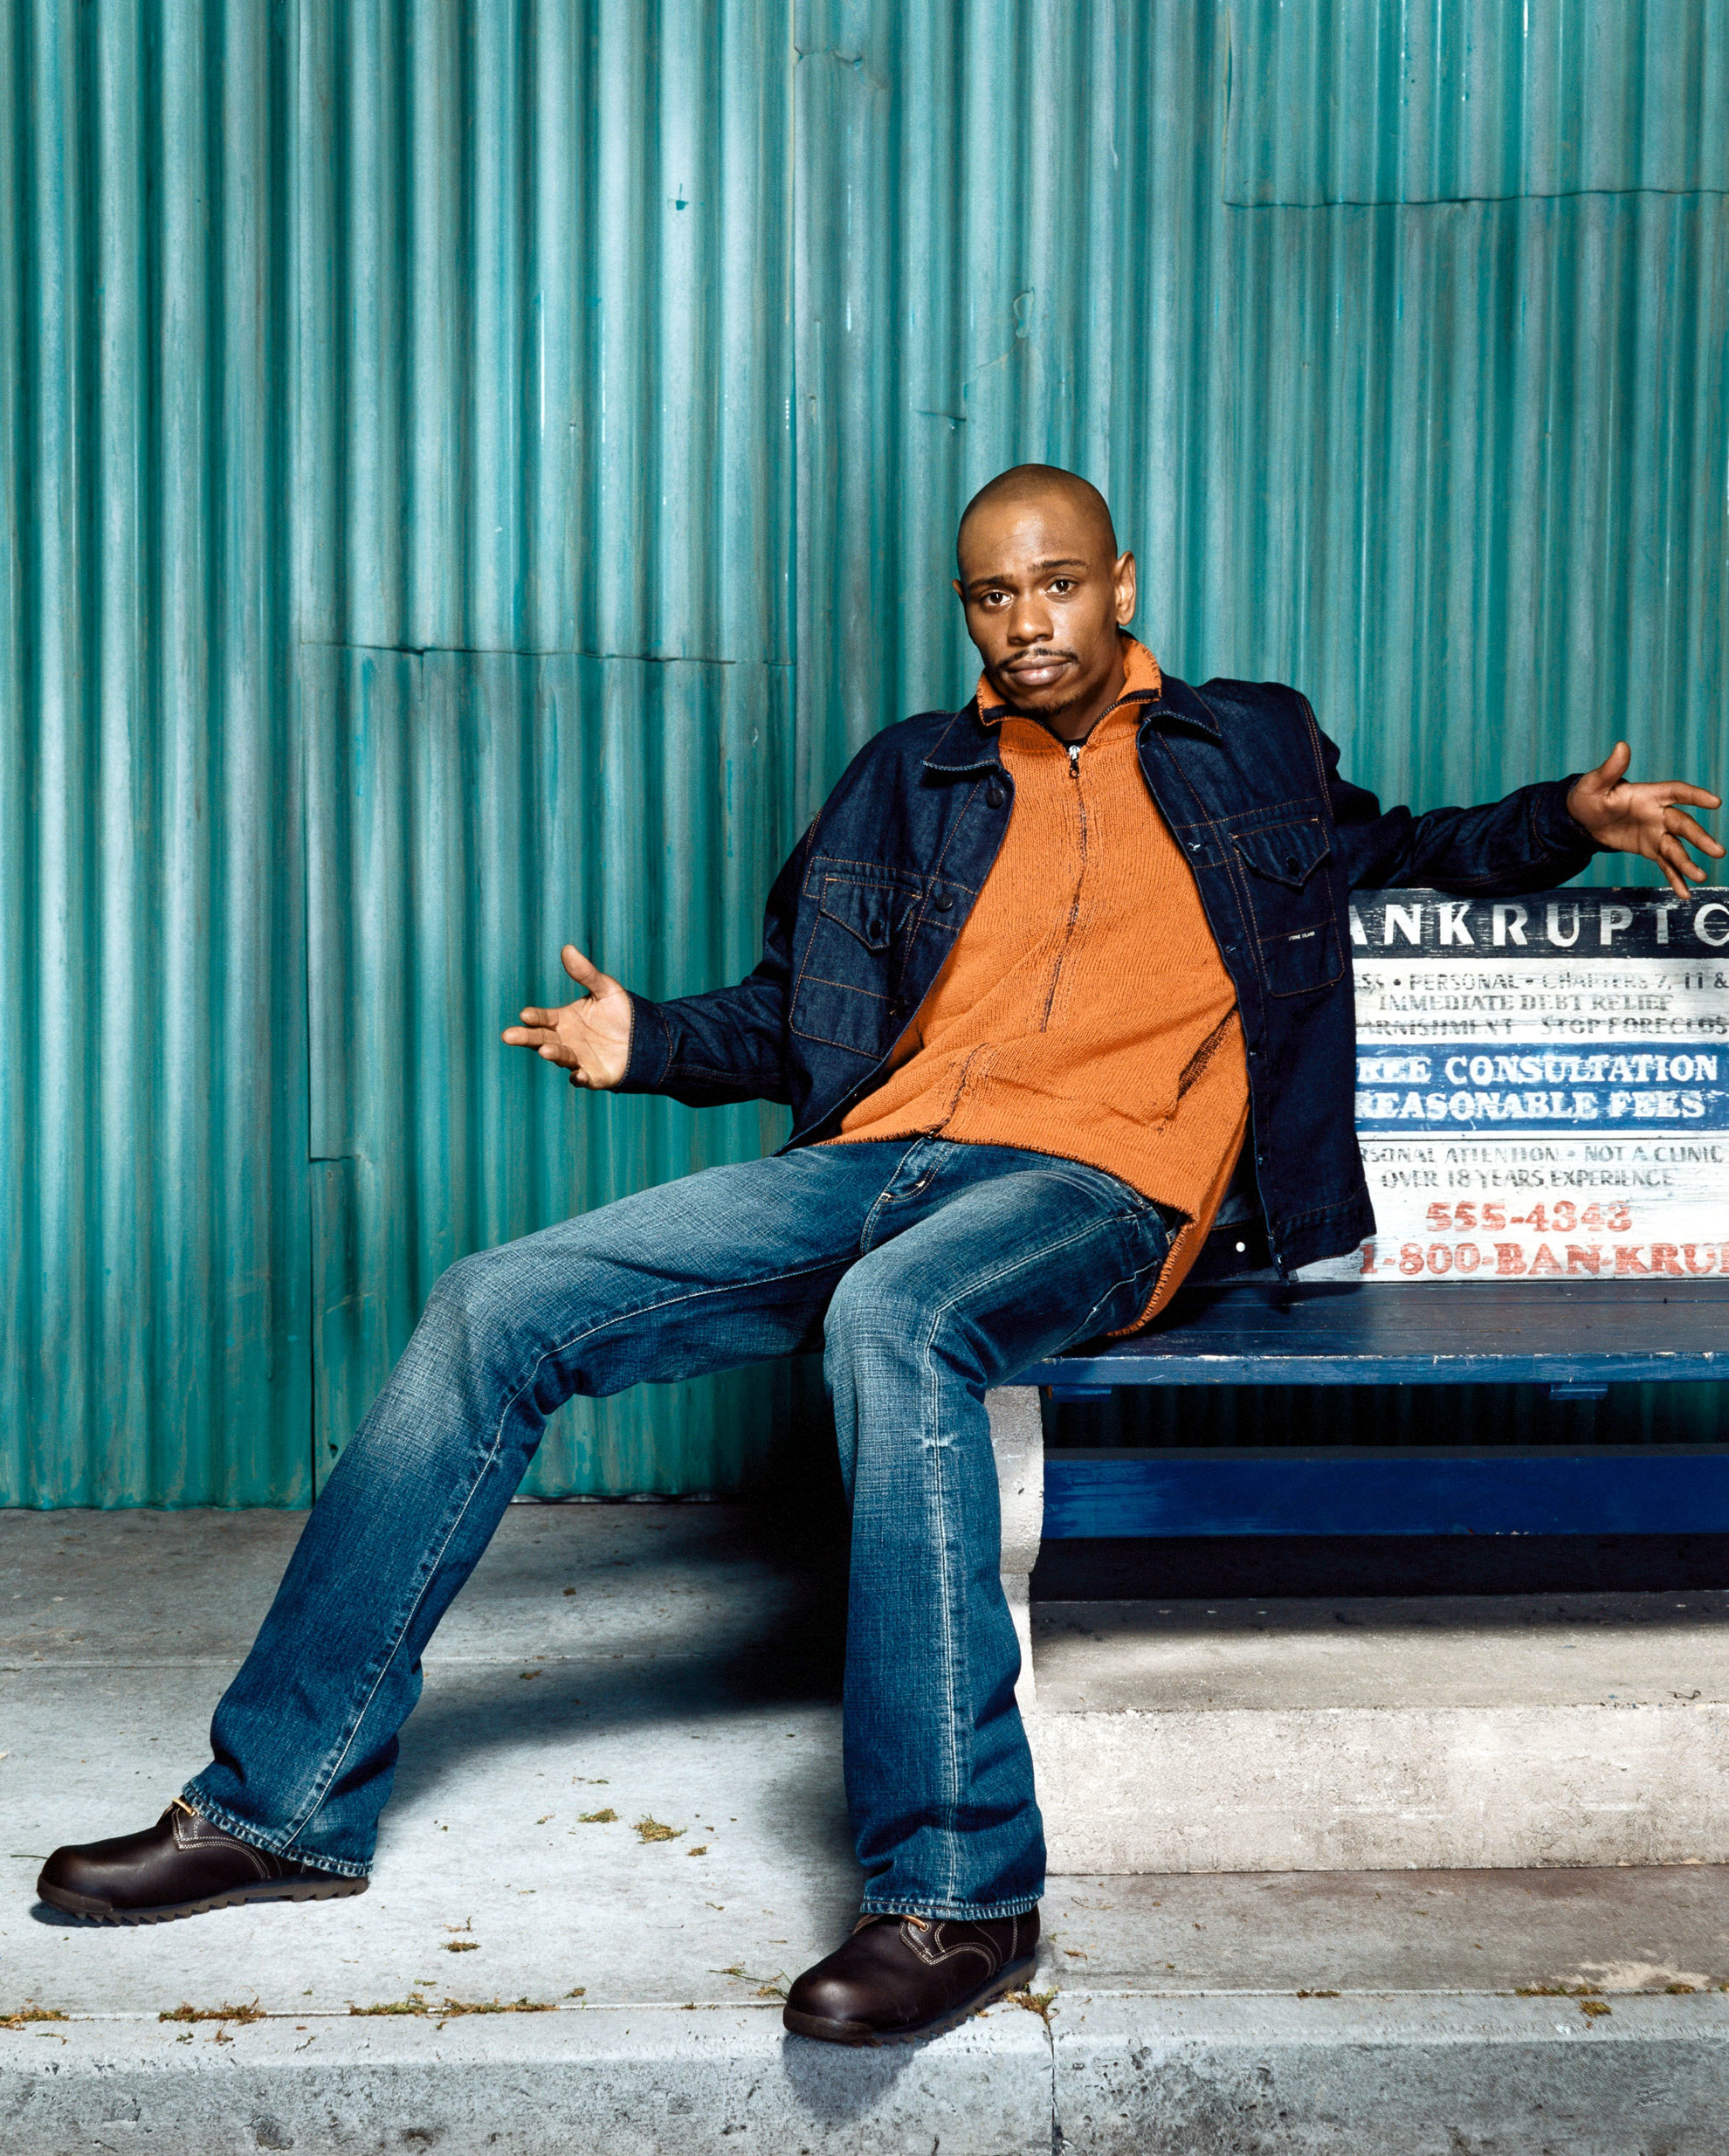 Dave Chappelle sitting on a bench in a promotional photograph